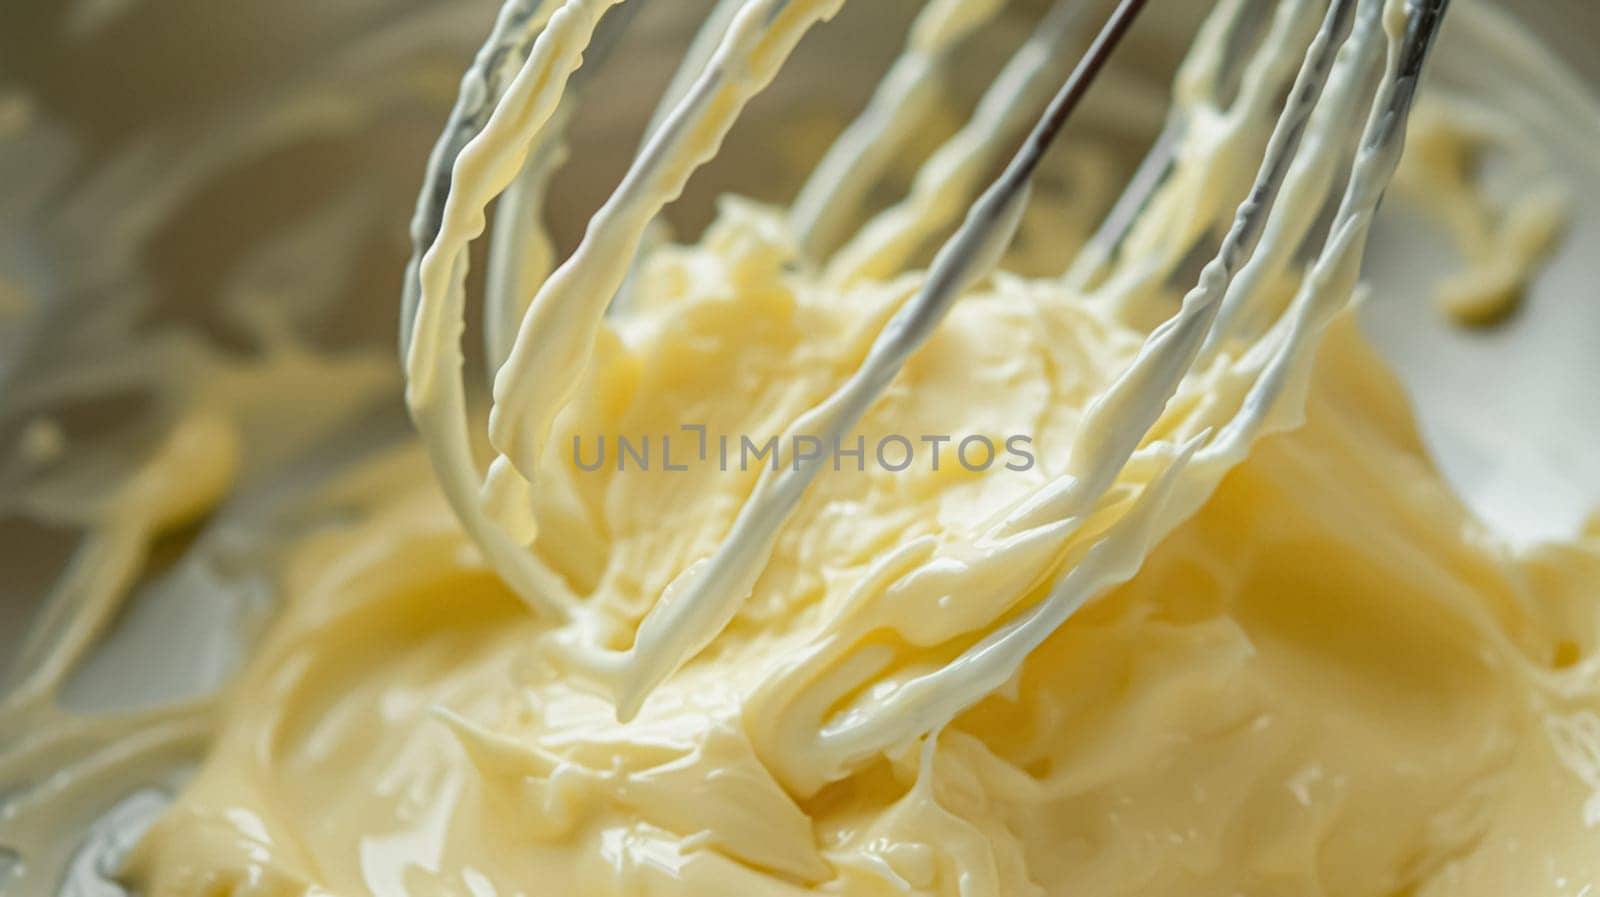 Whisk in bowl with creamy yellow batter, butter or custard, homemade baking and traditional food, country life